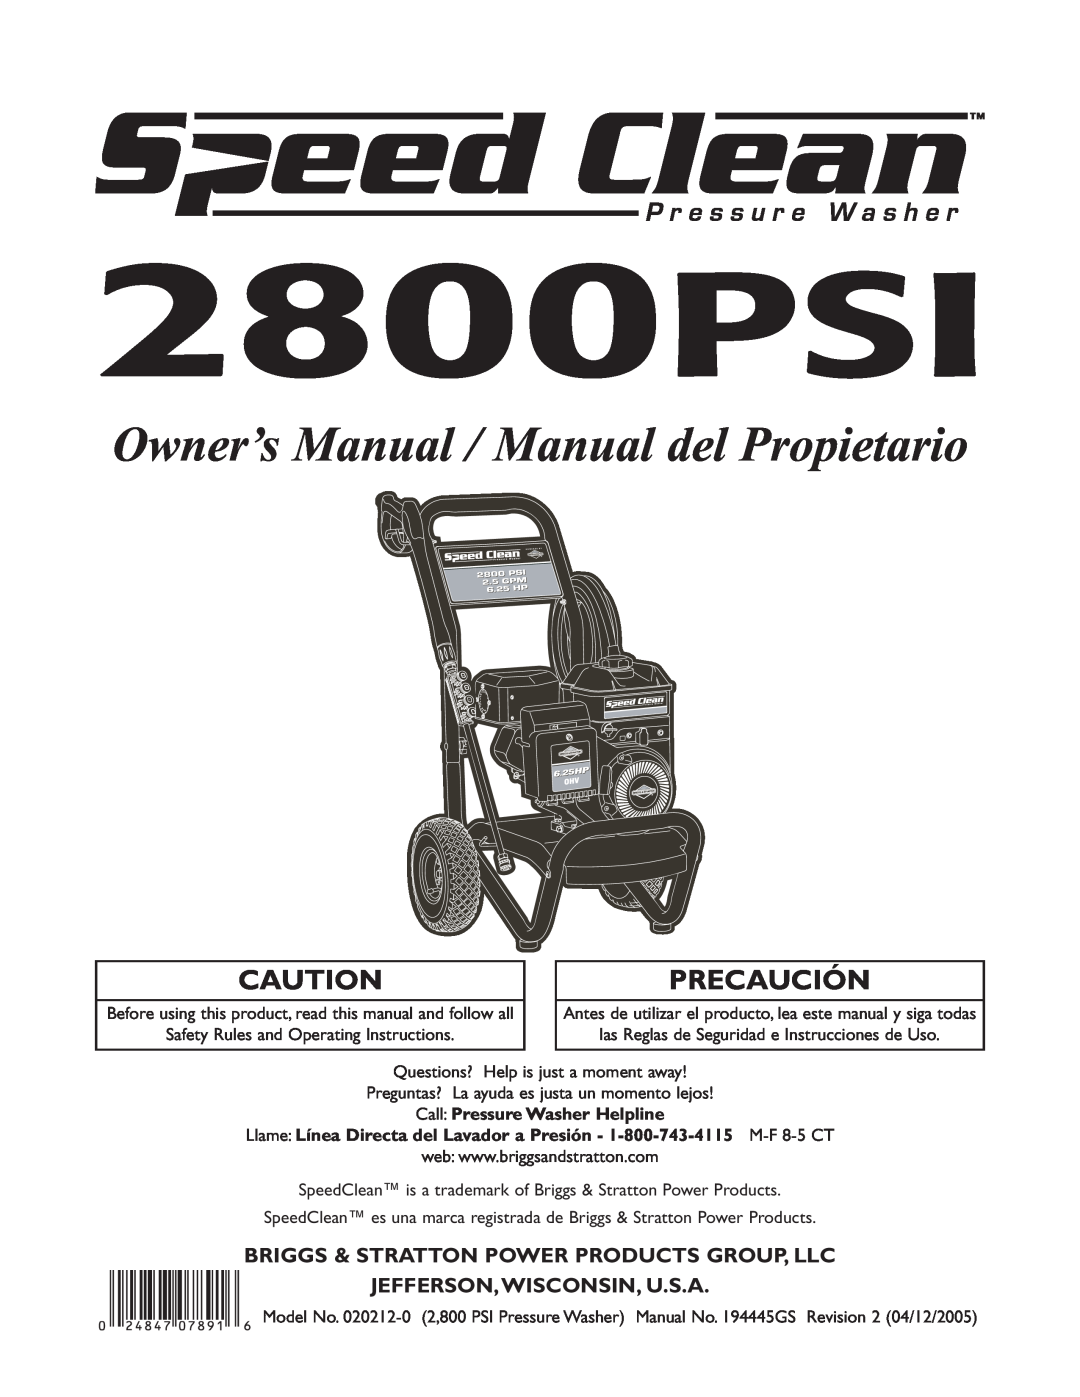 Briggs & Stratton 020212-0 owner manual Briggs & Stratton Power Products Group, Llc, Jefferson,Wisconsin, U.S.A, 2800PSI 